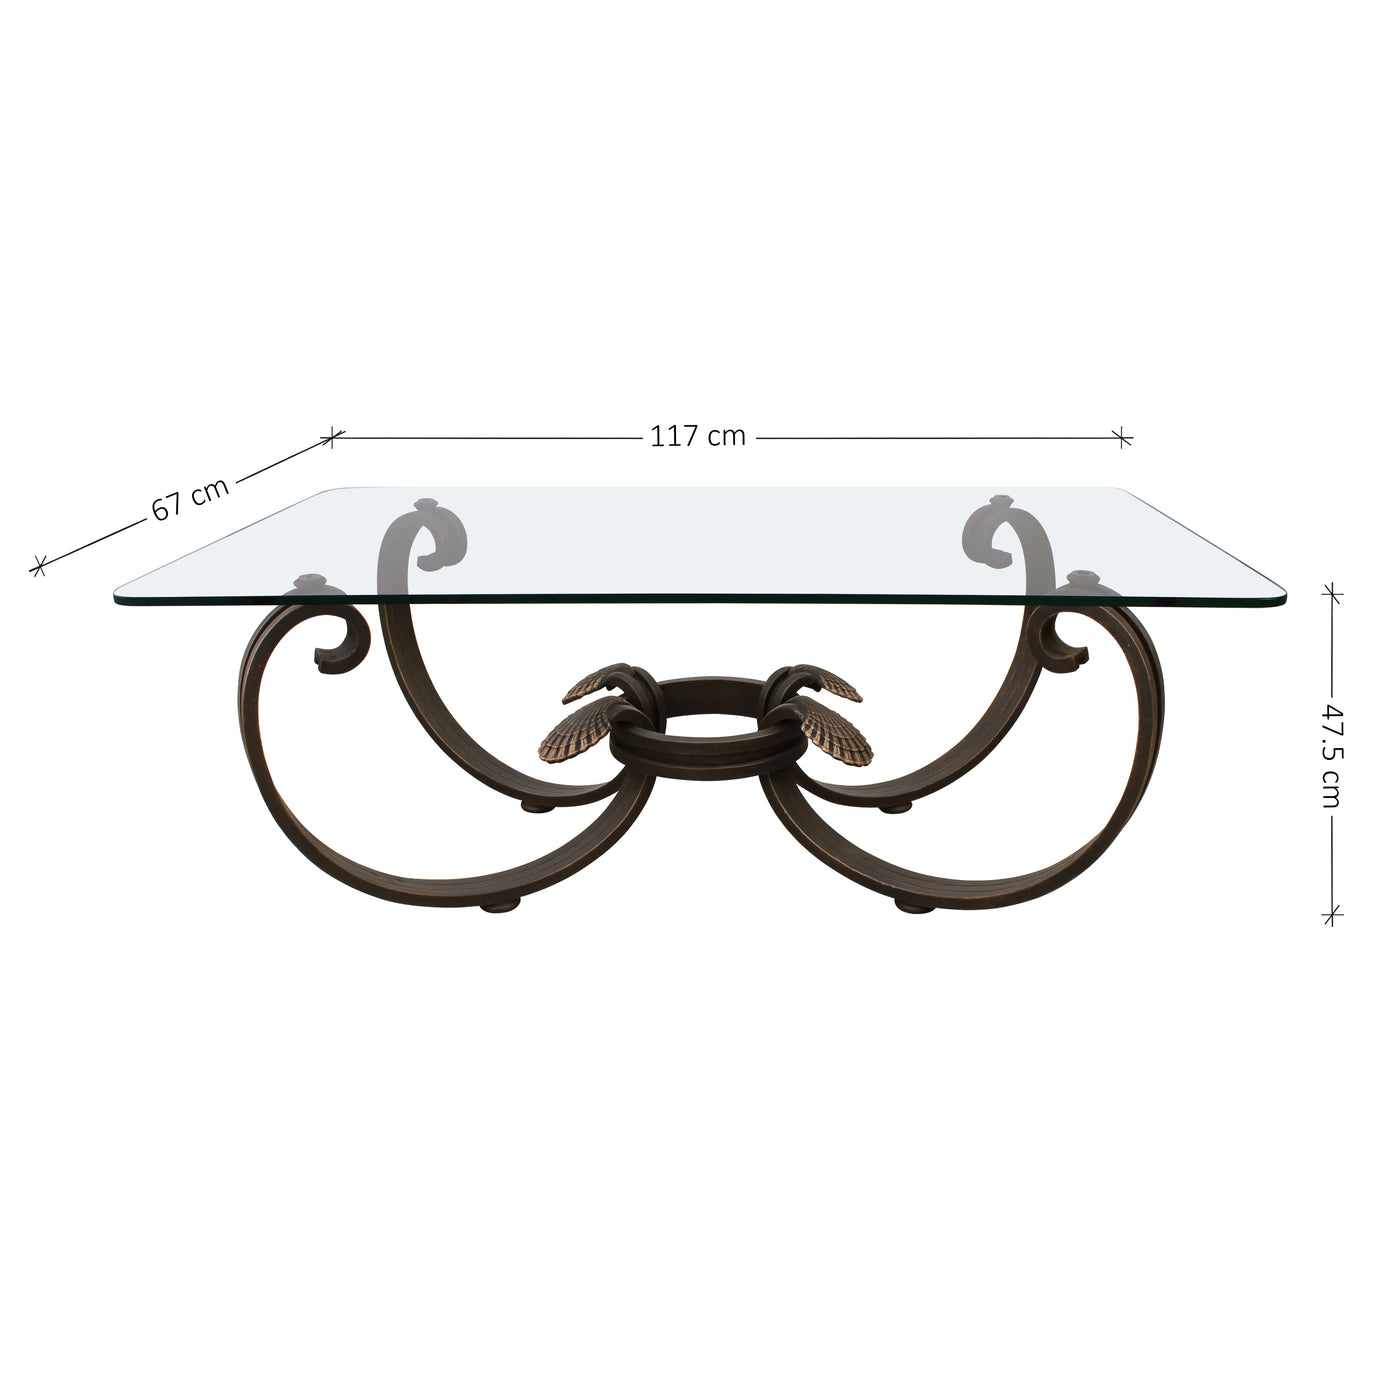 A neoclassical wrought iron center table inspired by seashells topped with glass; with annotated dimensions